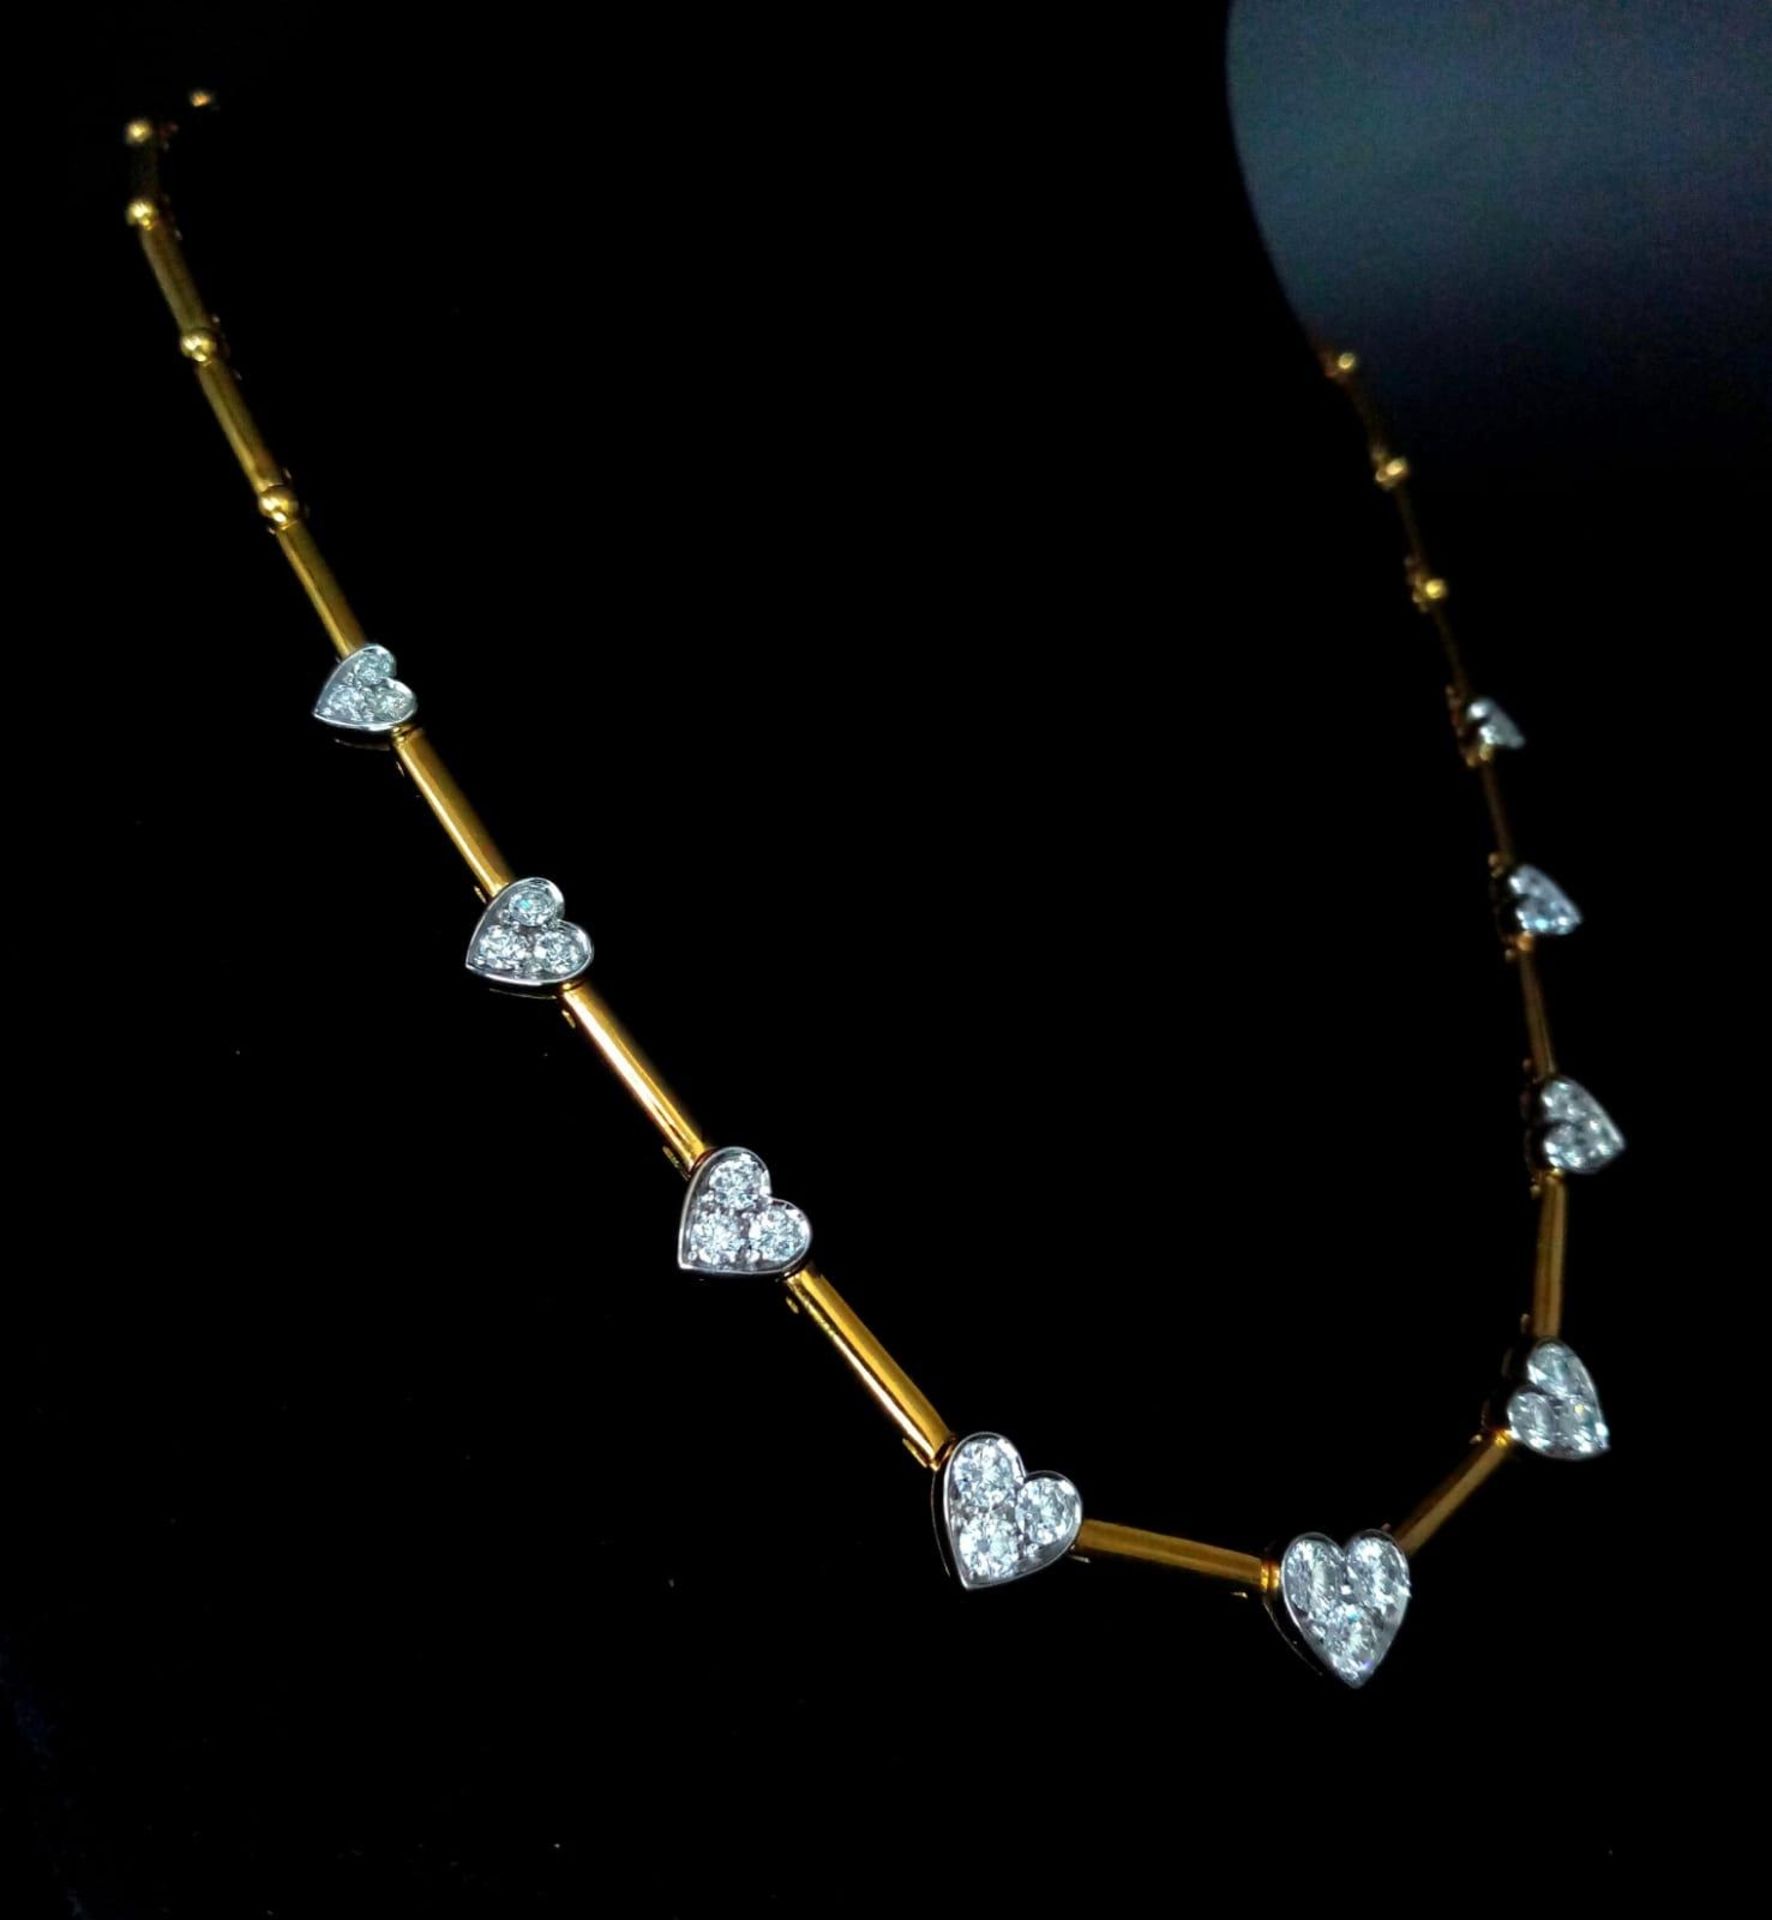 A Gorgeous 18K Gold and Heart-Diamond Necklace and Bracelet Set. The necklace is decorated with - Image 13 of 21